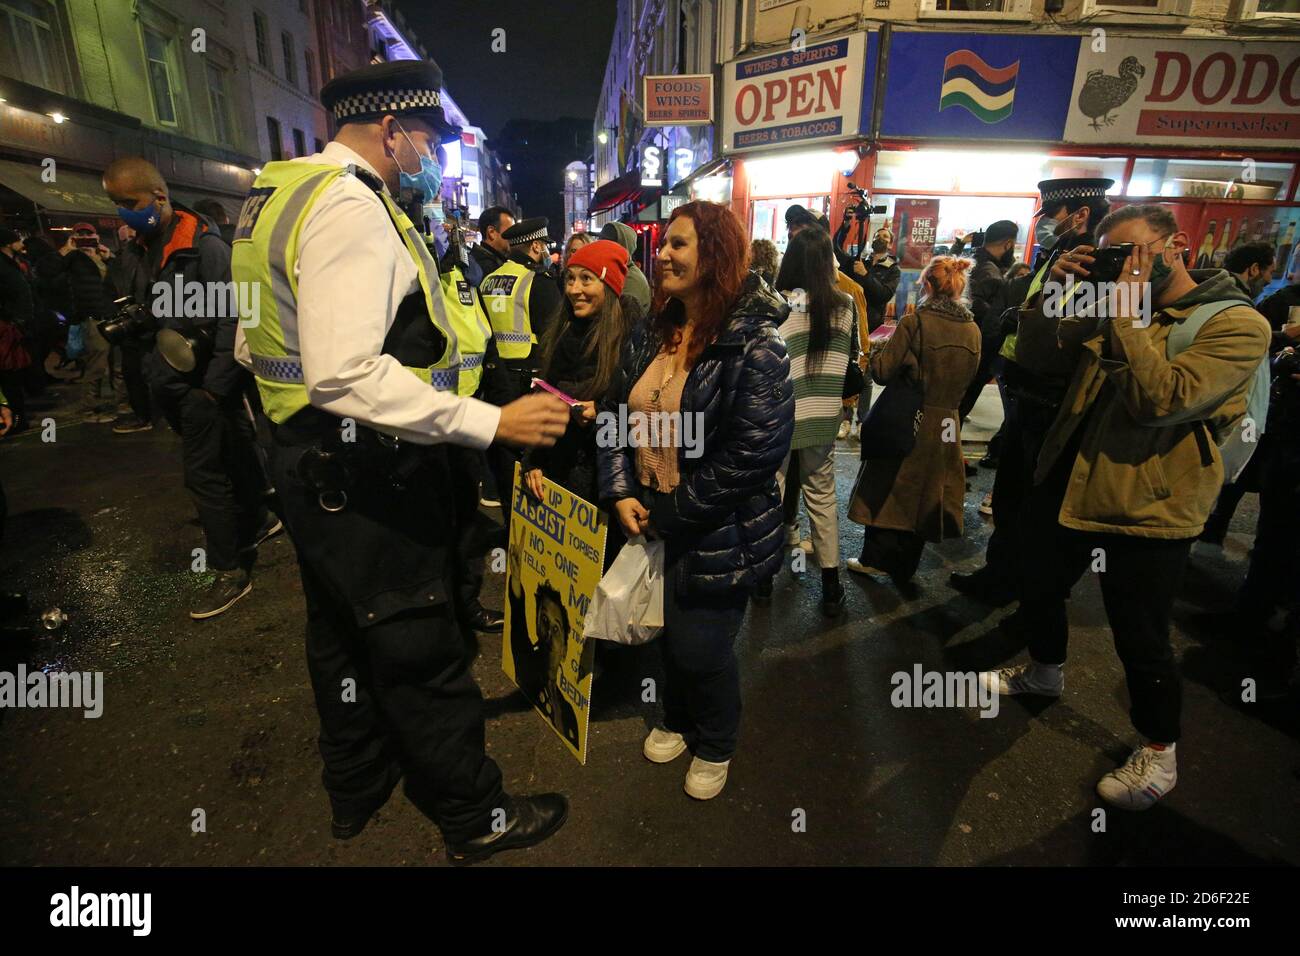 Police dispersing a gathering on the corner of Old Compton Street and Frith Street, London, on the last night before the city is put into Tier 2 restrictions to curb the spread of coronavirus. Stock Photo